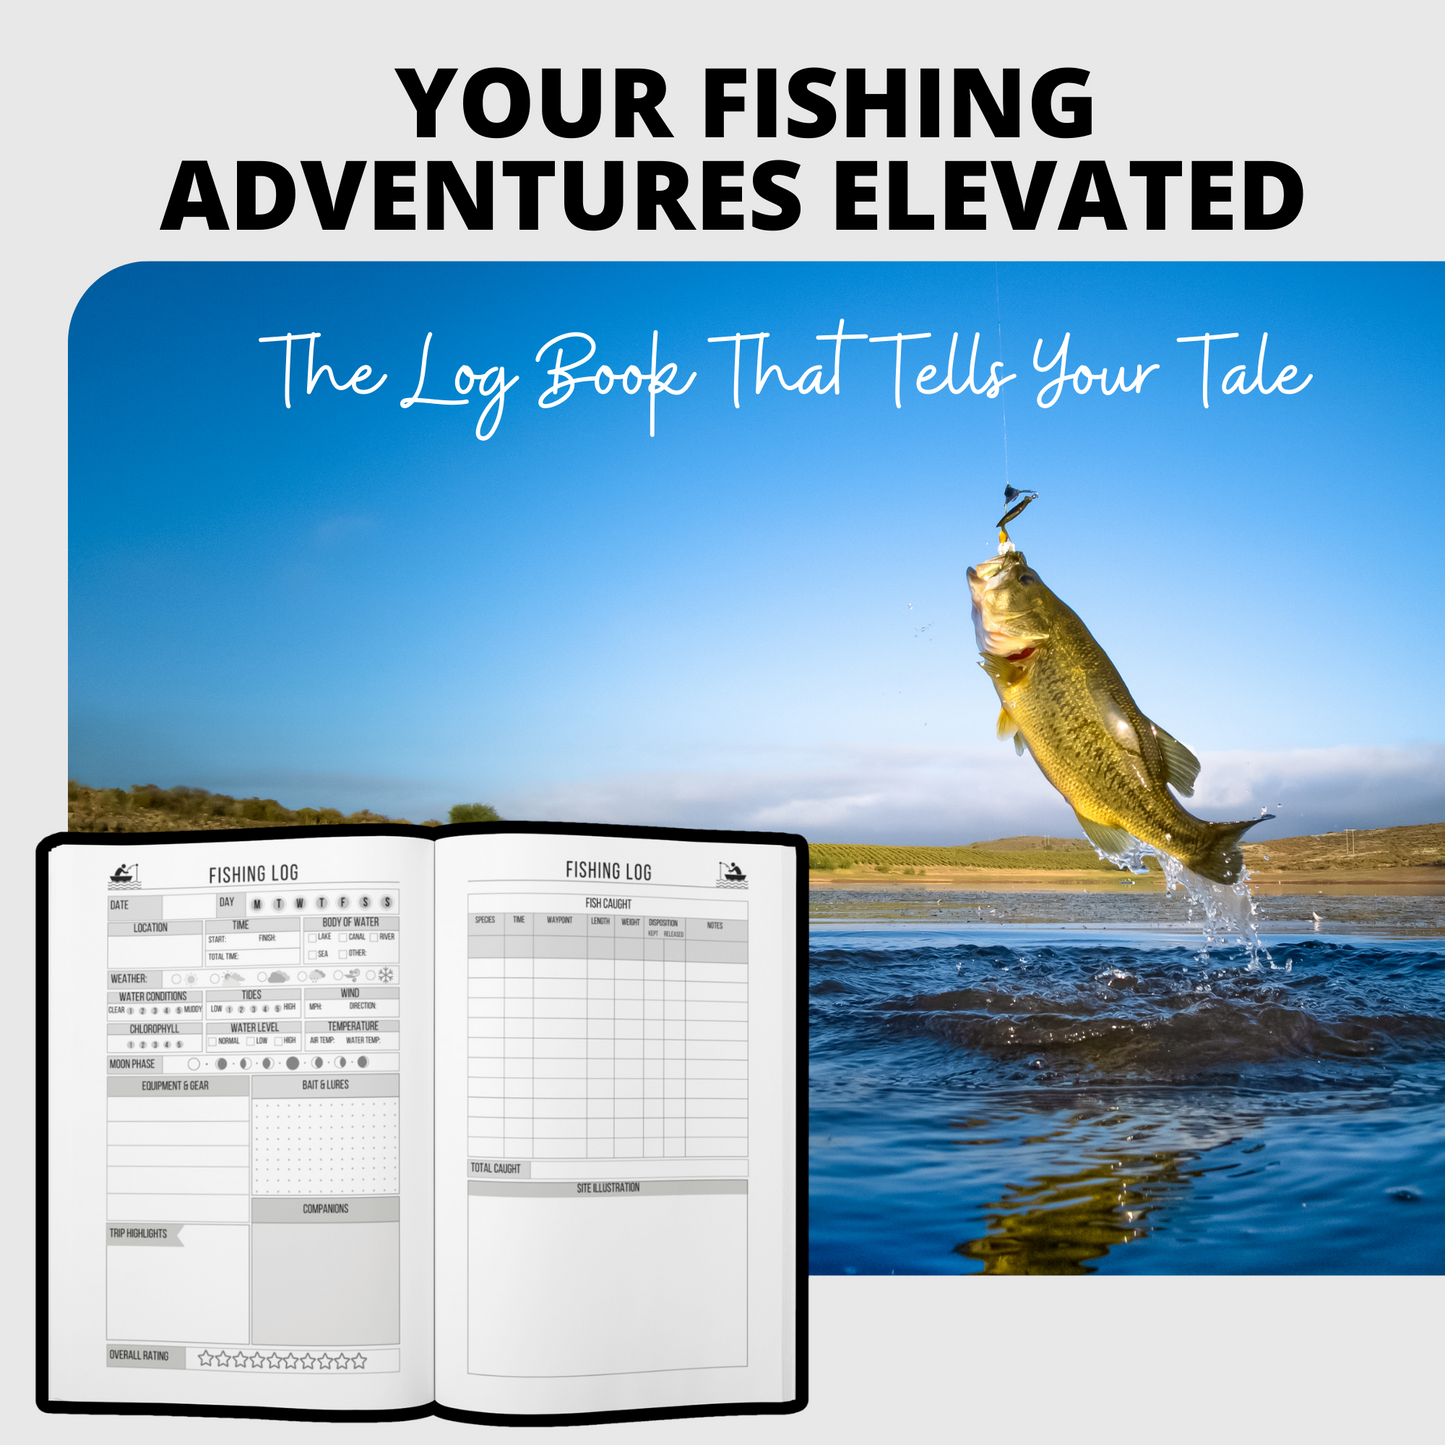 Fishing Log Book: Keep Track of Your Fishing Locations, Companions,  Weather, Equipment, Lures, Hot Spots, and the Species of Fish You've  (Paperback)